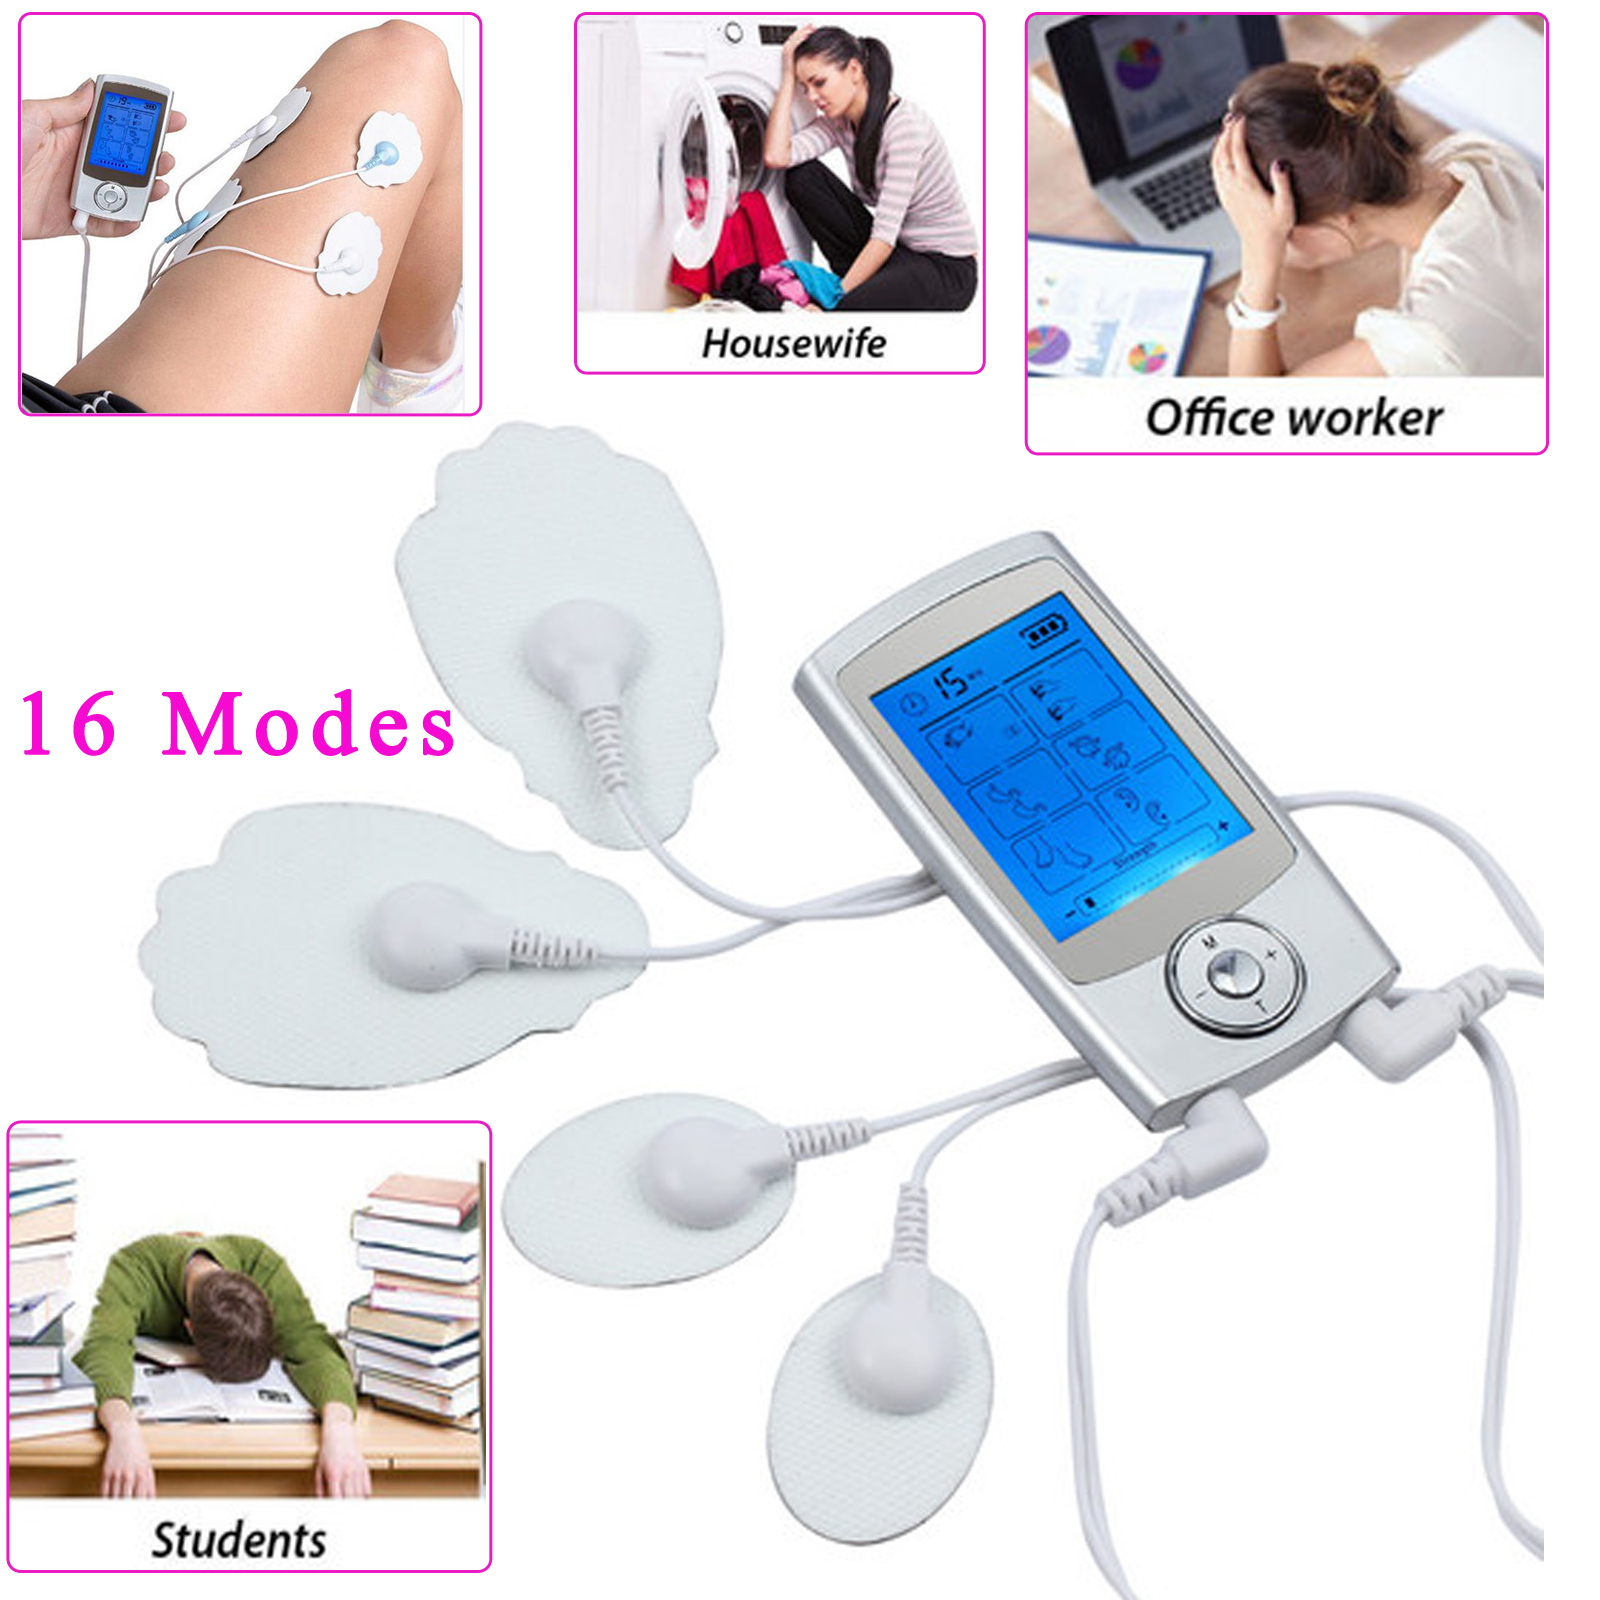 Details about Tens Unit Electric Pulse Massager Muscle Stimulator Body Therapy Pain Relief NEW